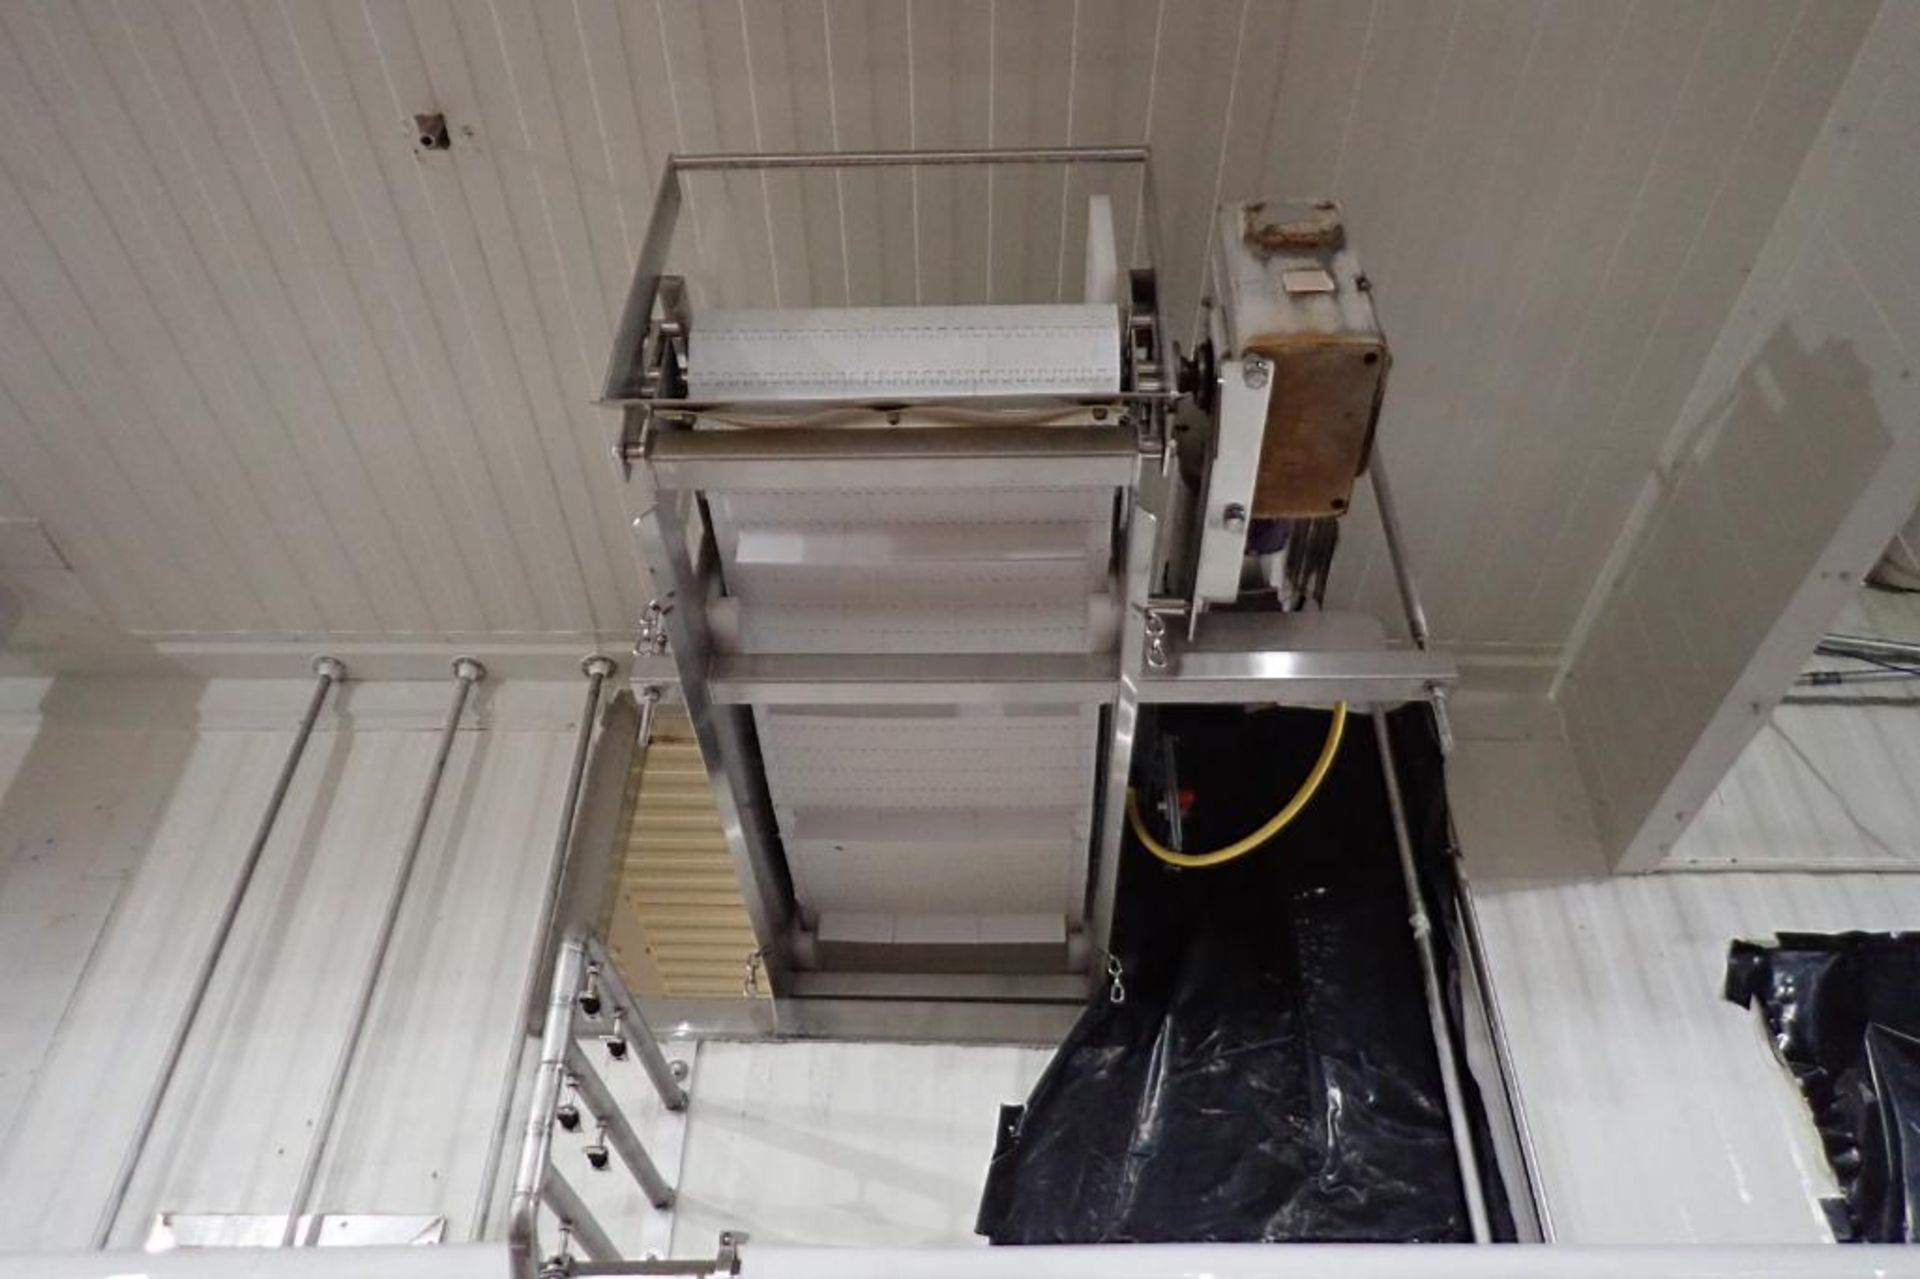 MMC Z-shaped incline conveyor - (Located in Fayetteville, AR) - Image 12 of 12